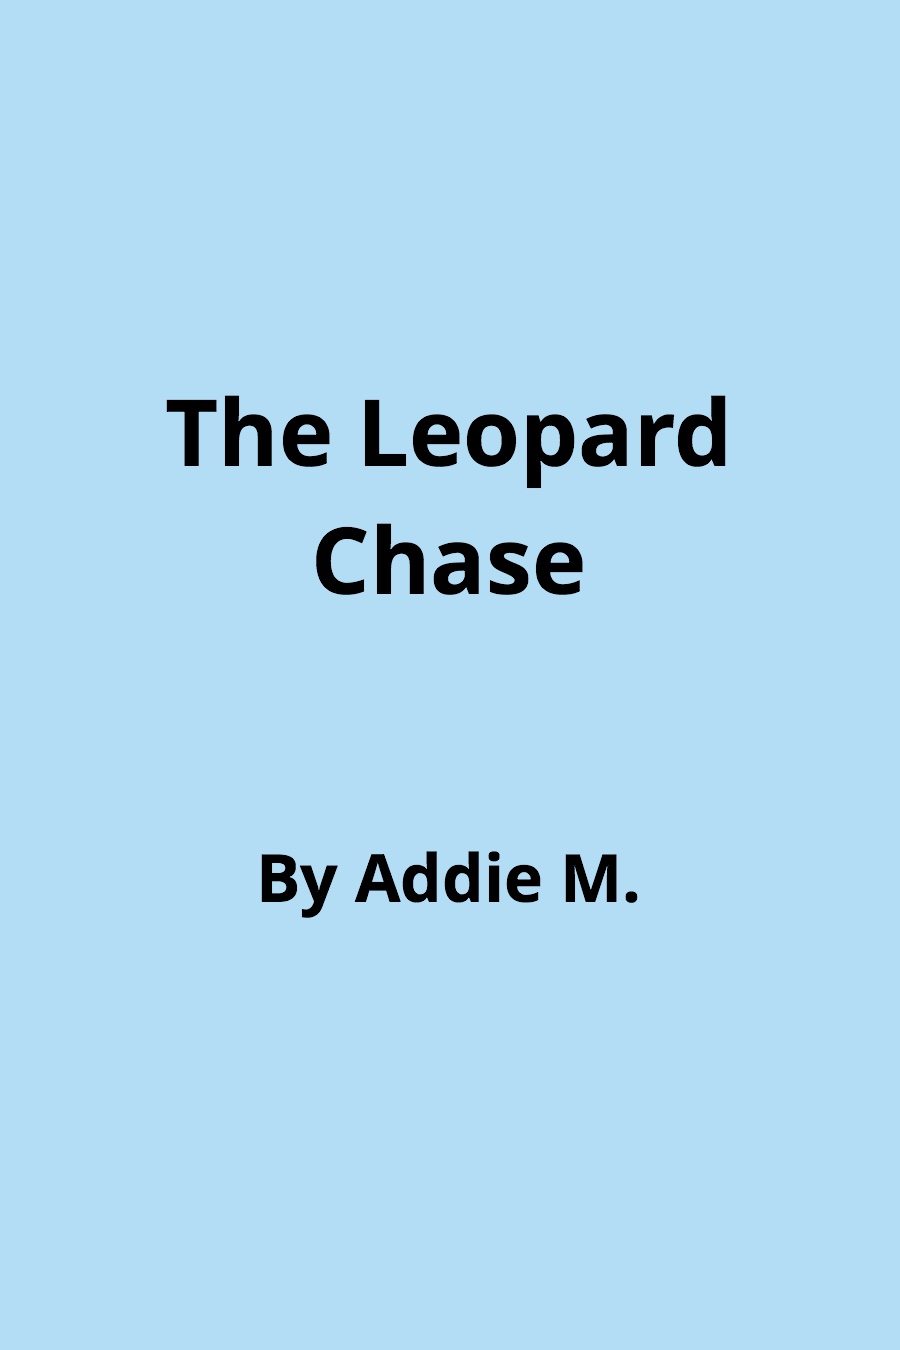 The Leopard Chase by Adeline Addie M